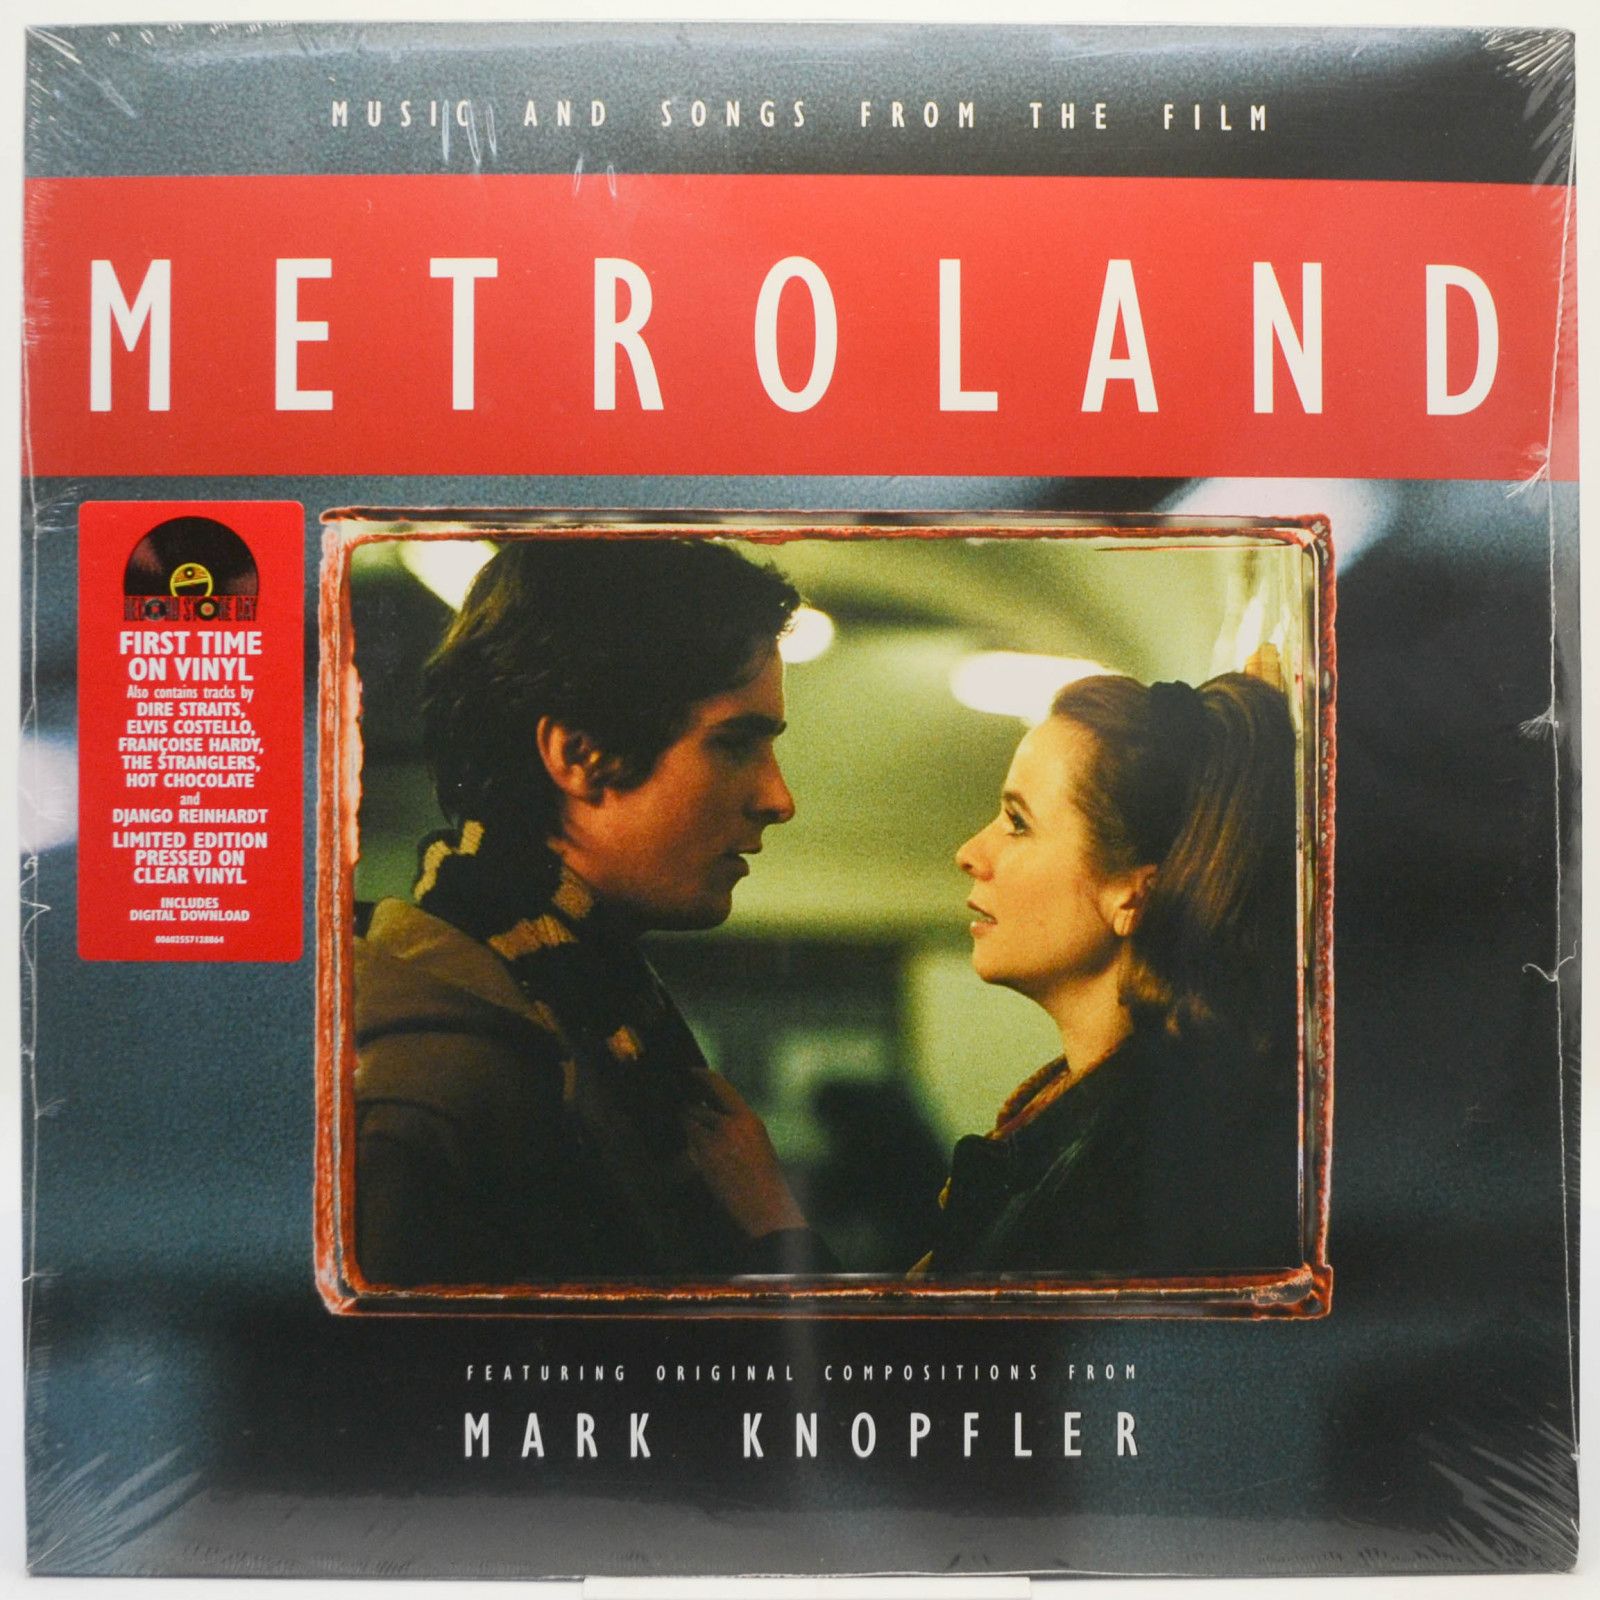 Mark Knopfler — Music And Songs From The Film Metroland, 2020